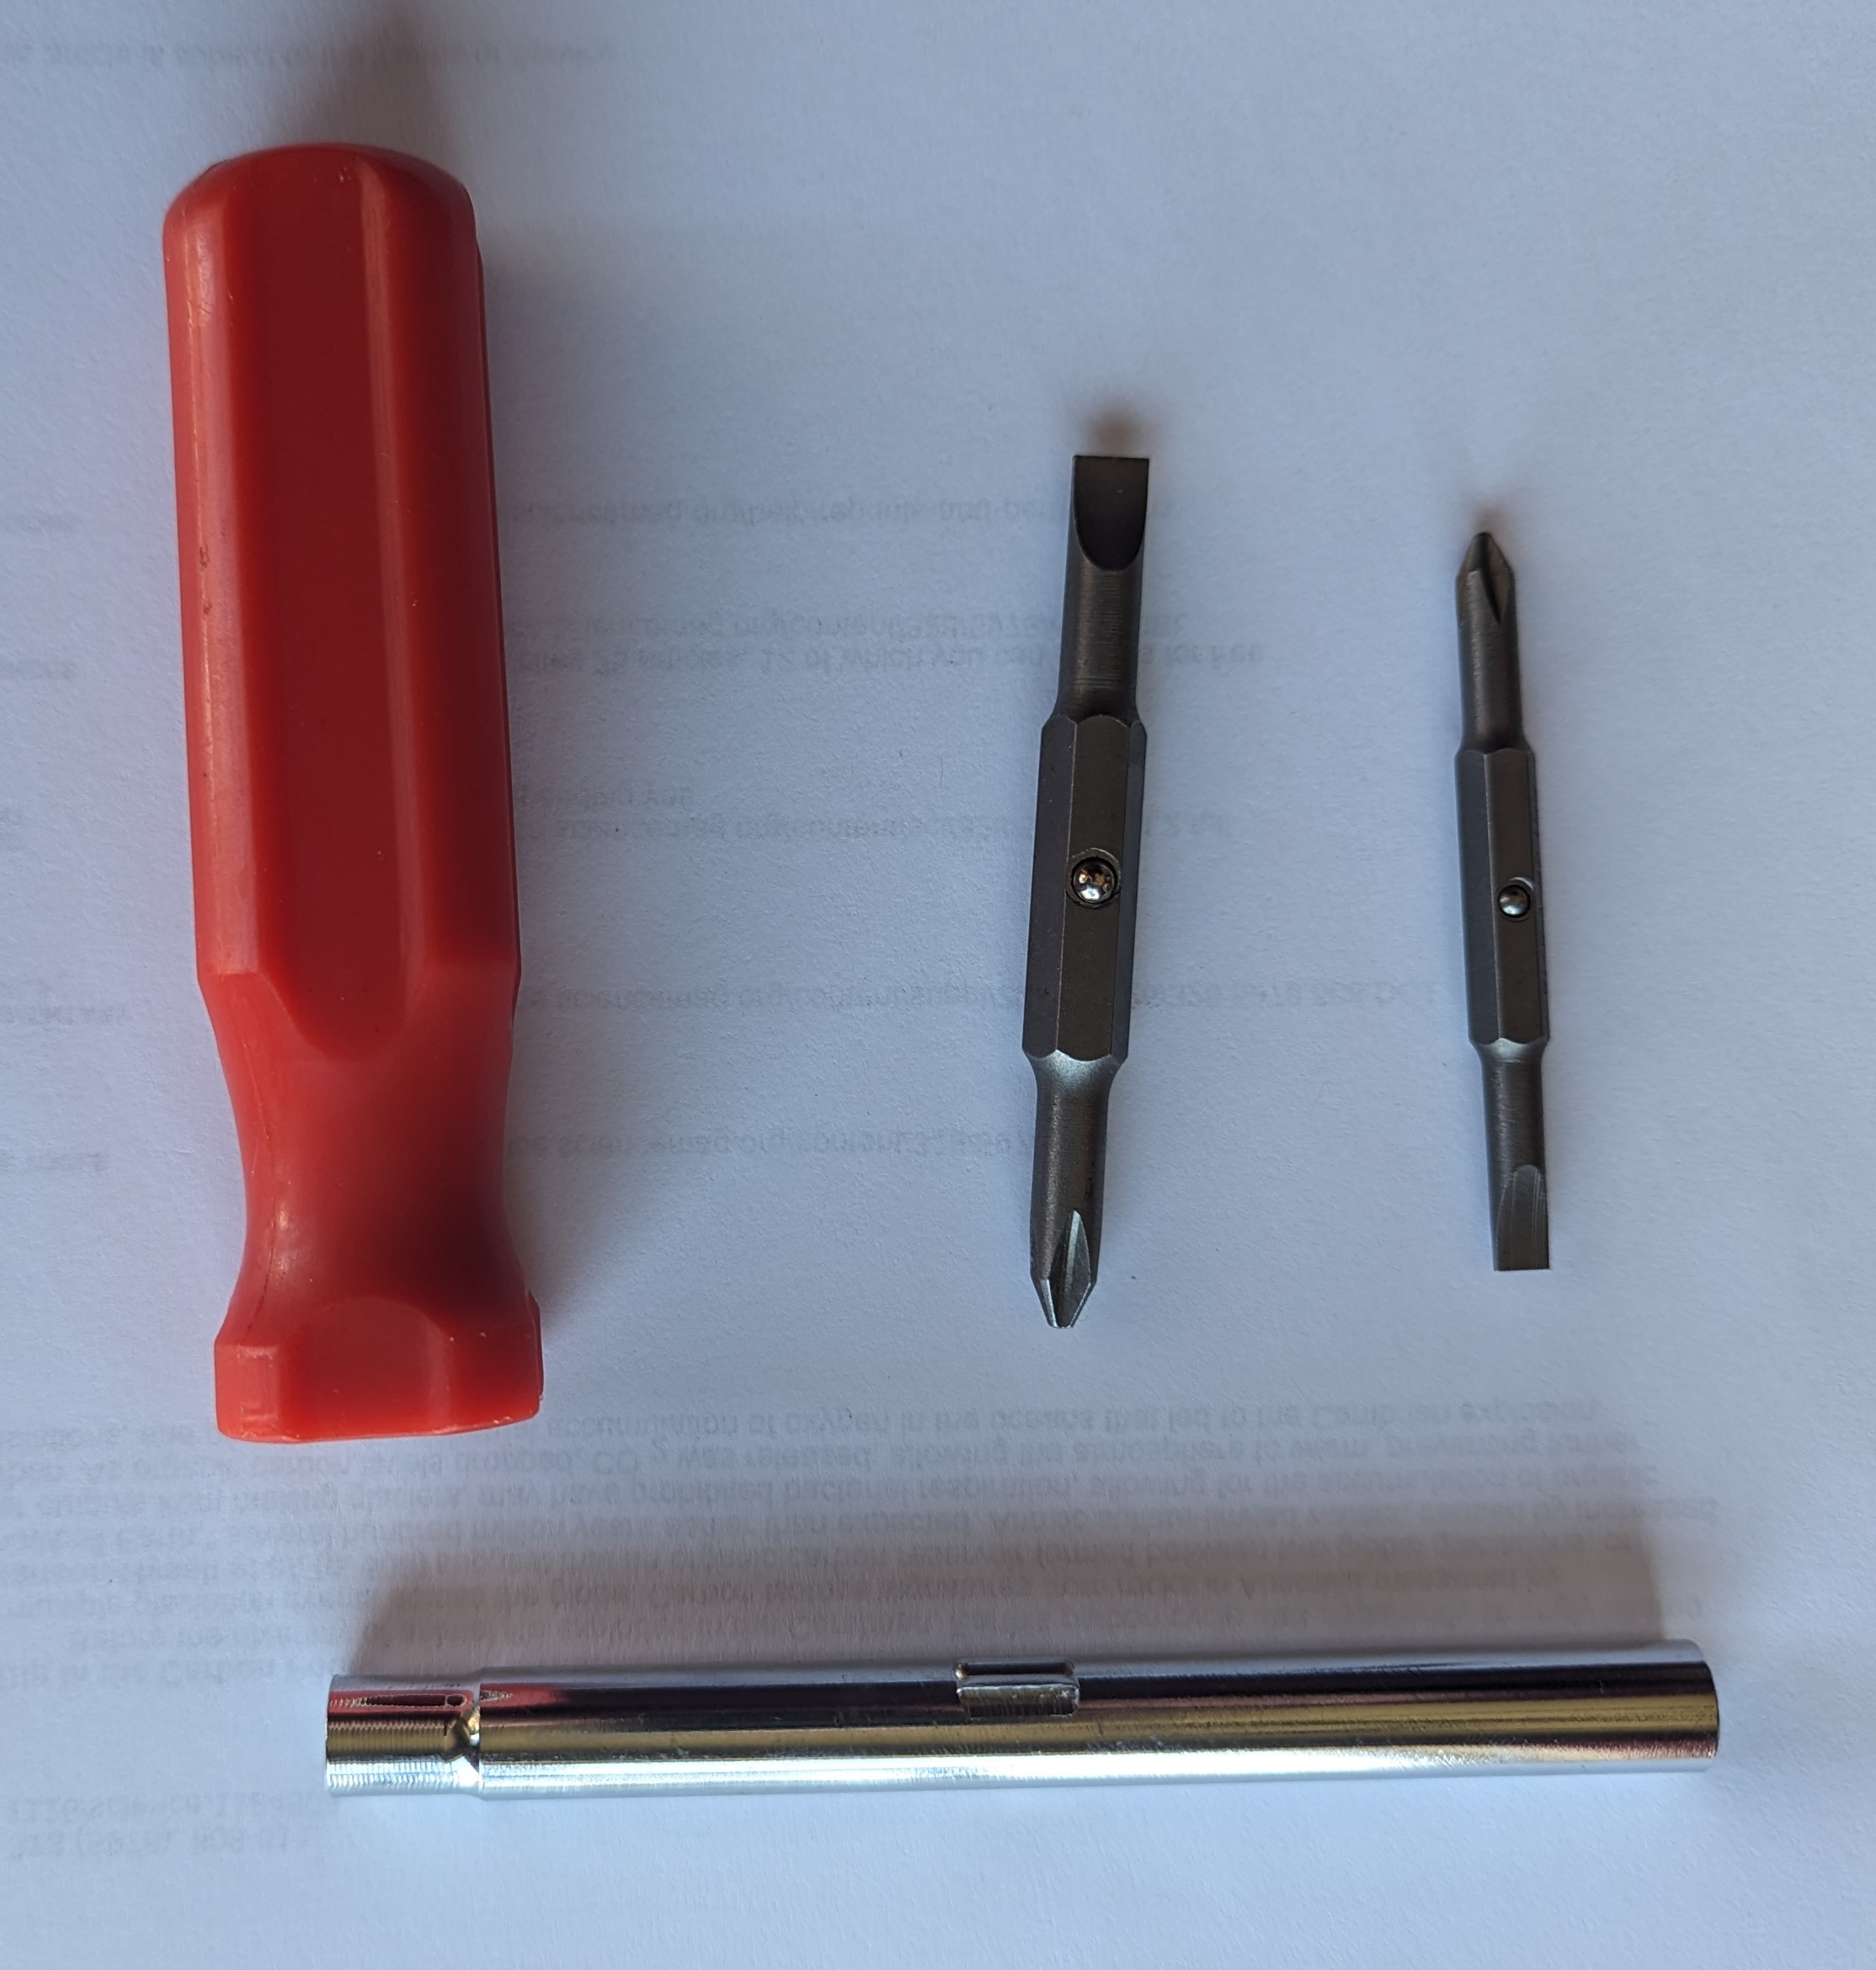 6-in-1 screwdriver disassembled